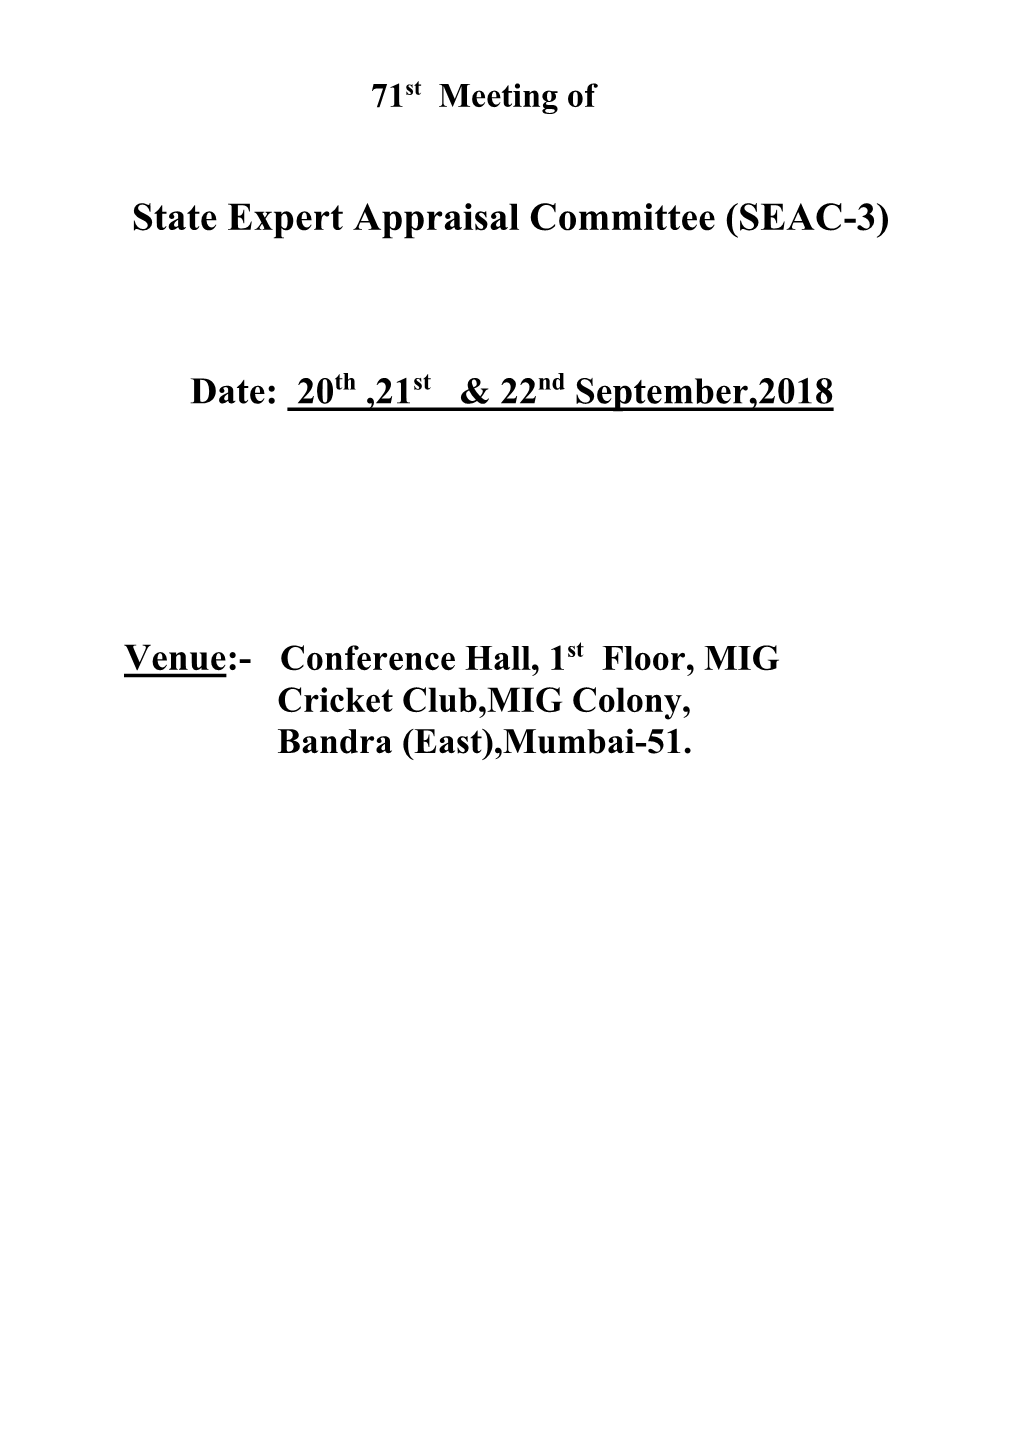 State Expert Appraisal Committee (SEAC-3)